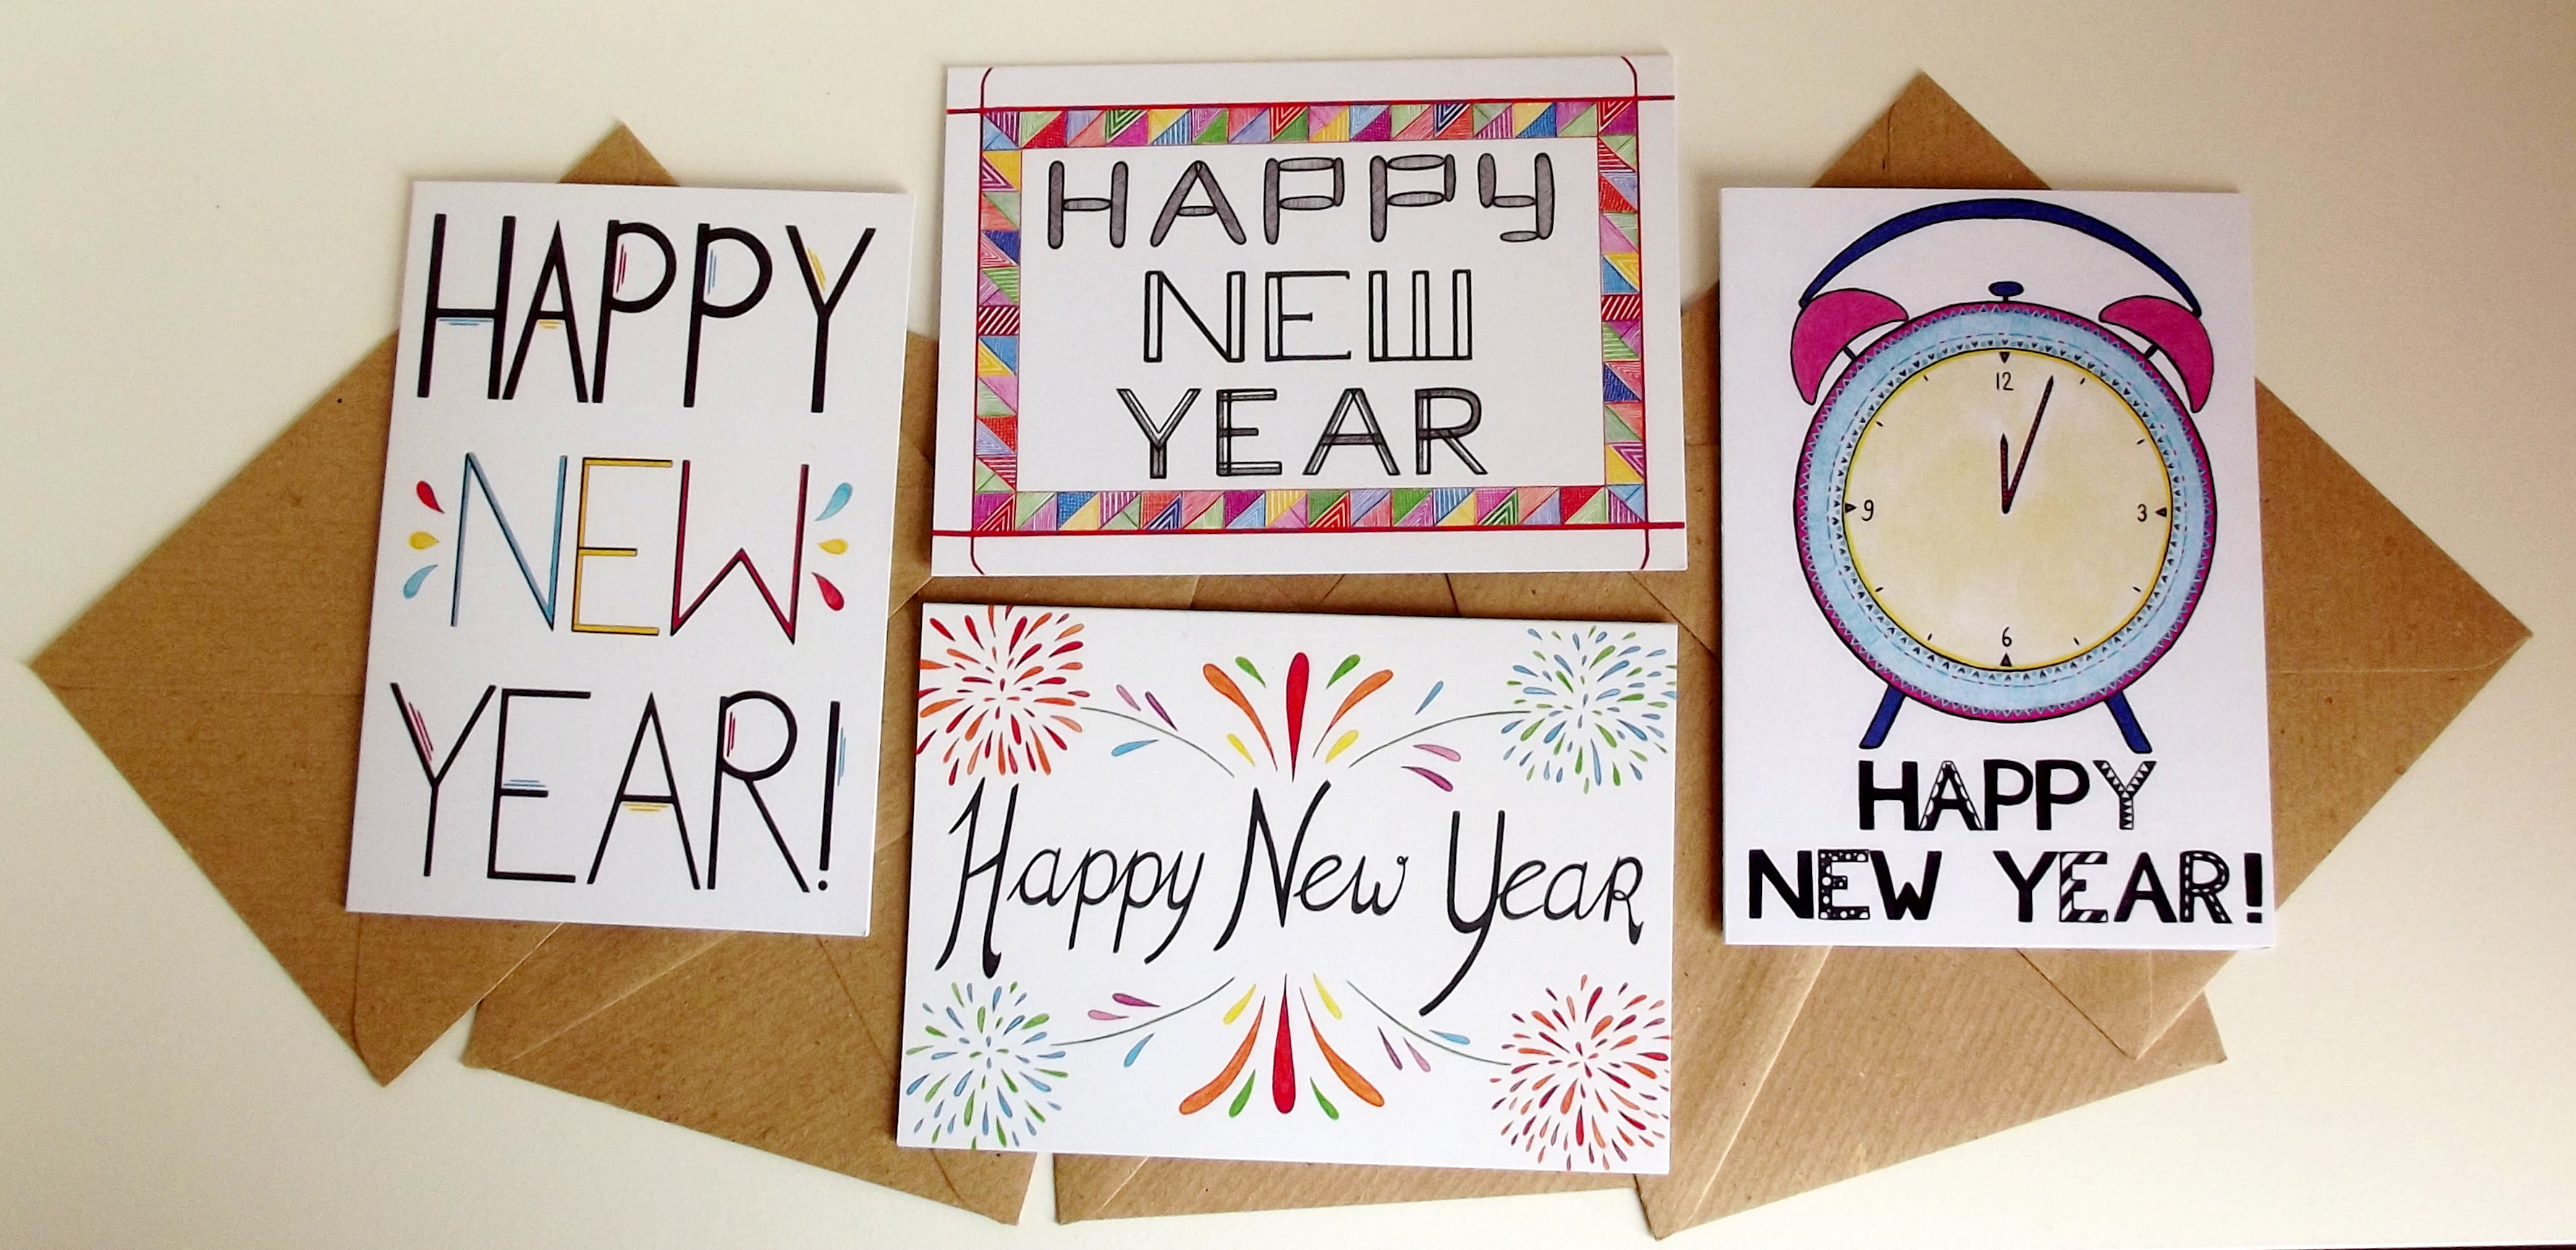 Happy New Year Cards, 2018 Cards, Greeting Cards, Sustainable, Recycled Paper